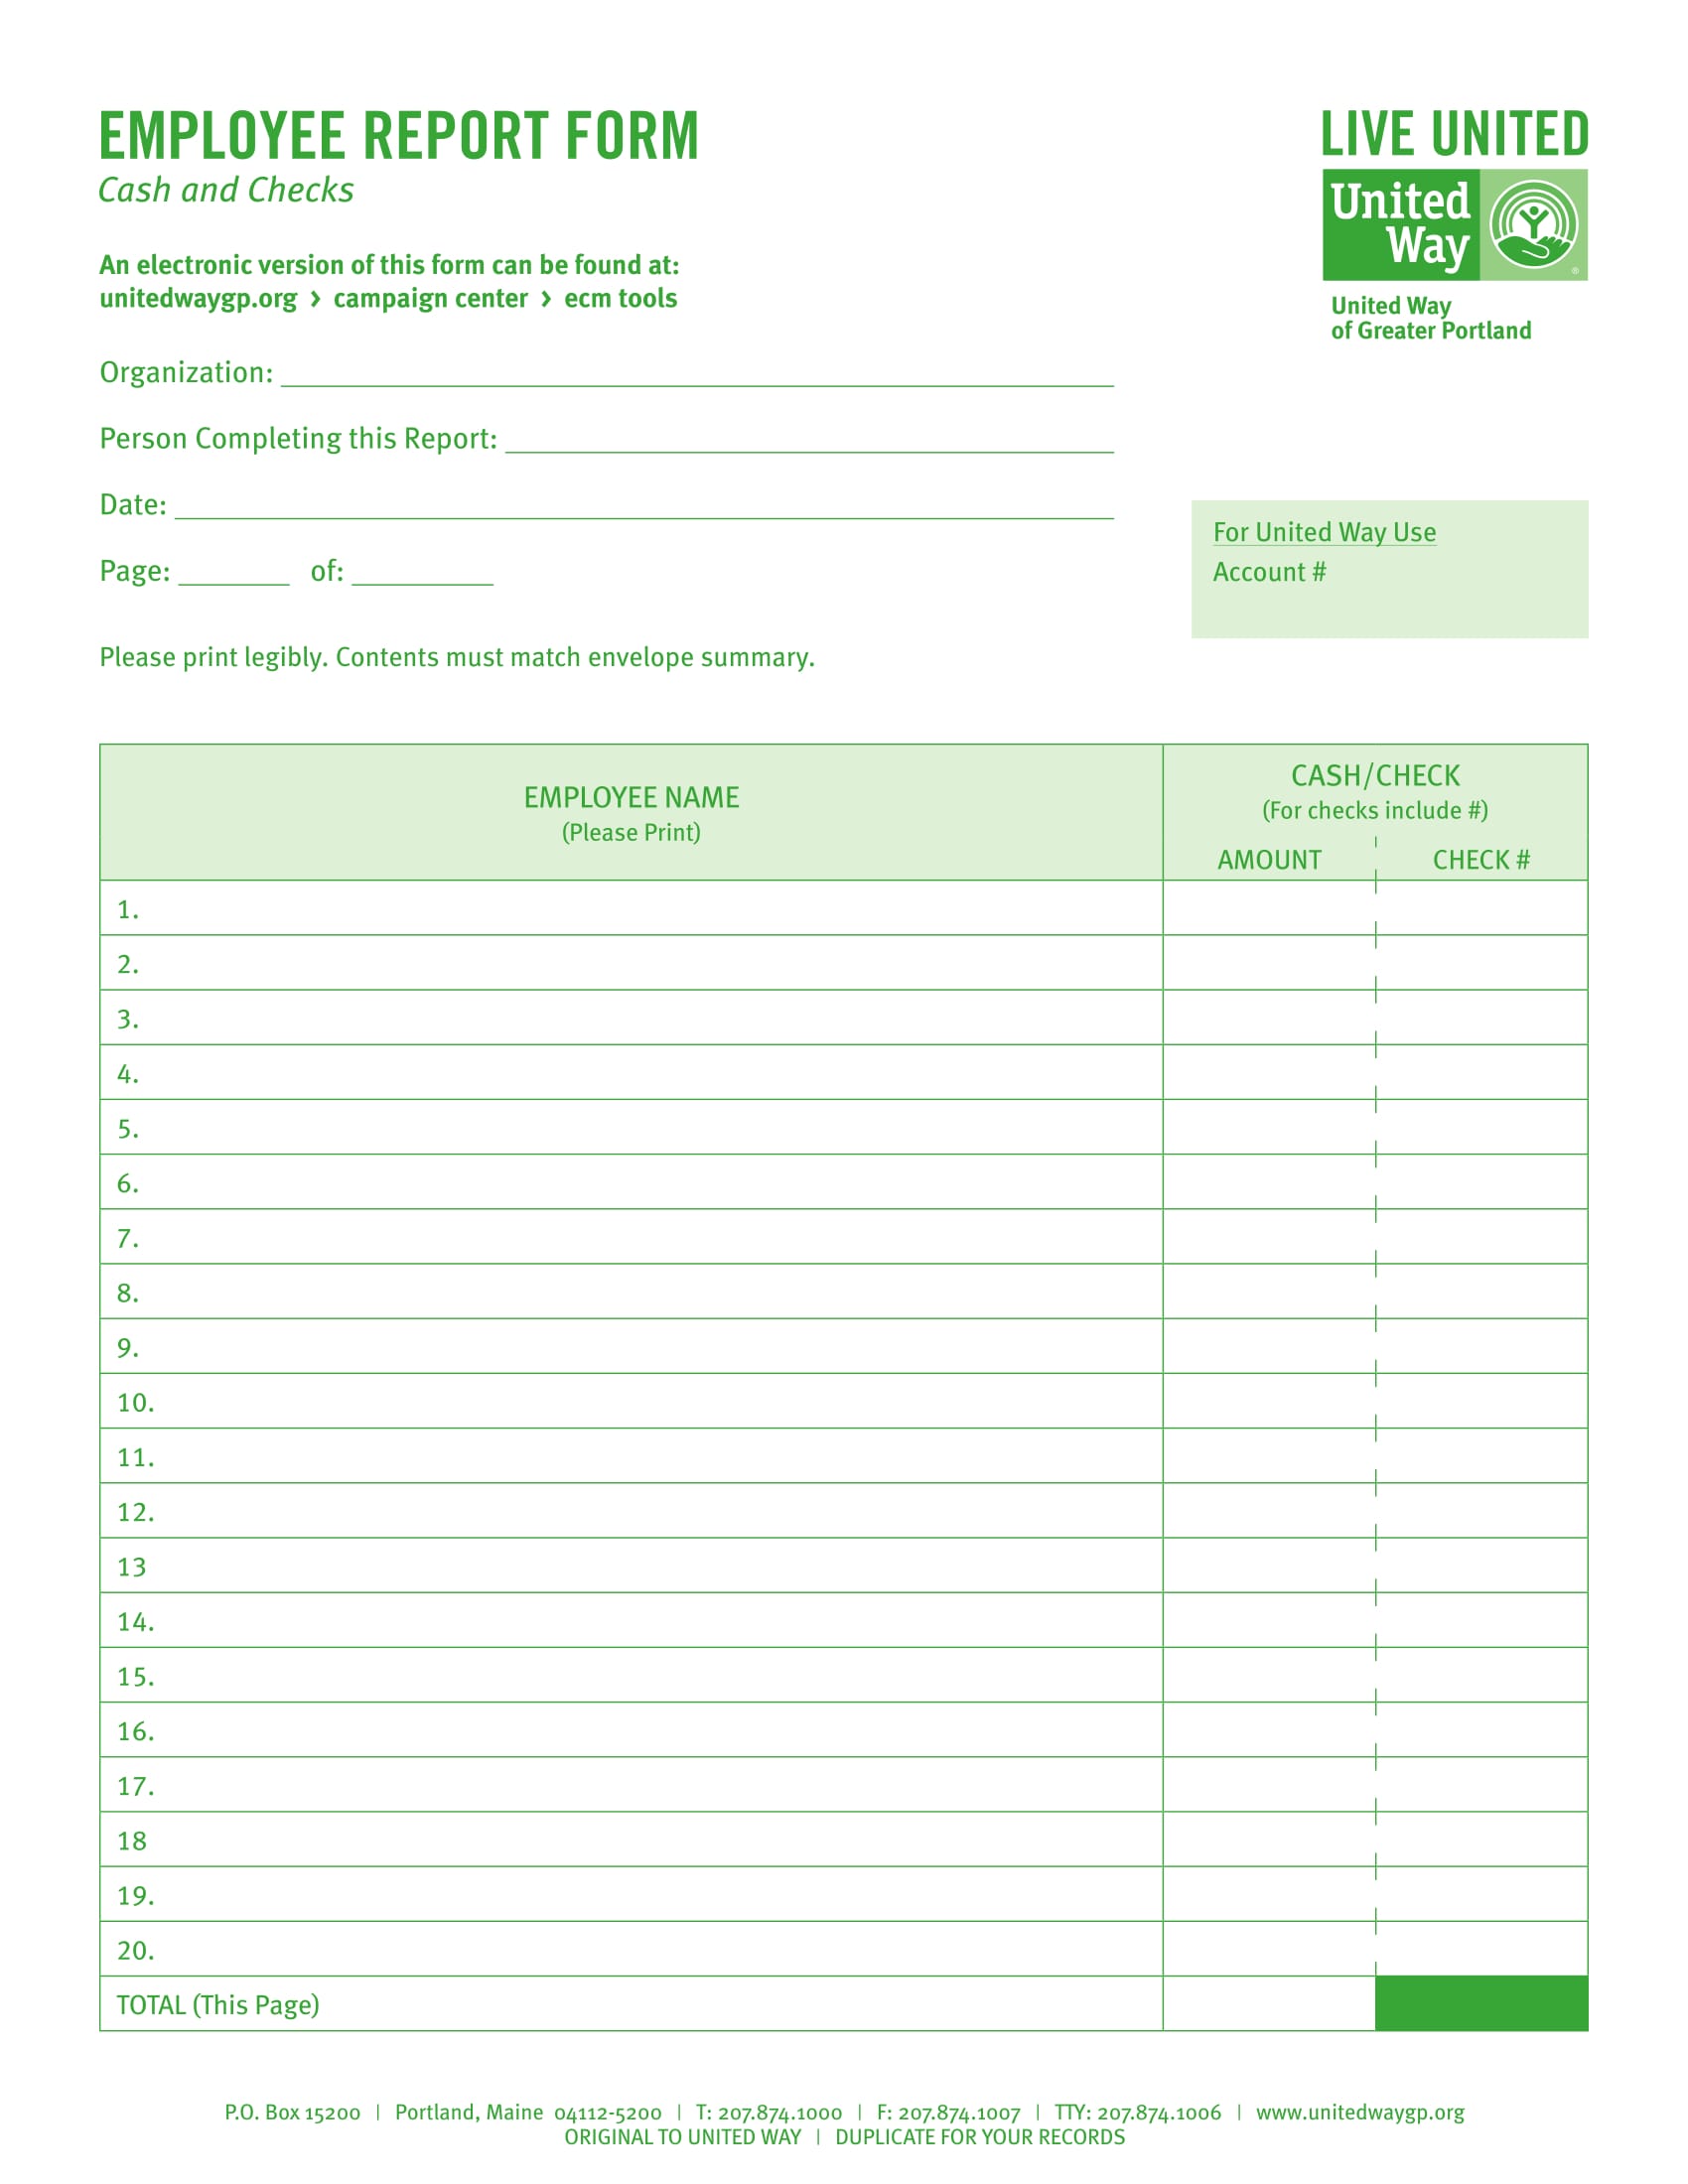 cash and checks employee report form 1